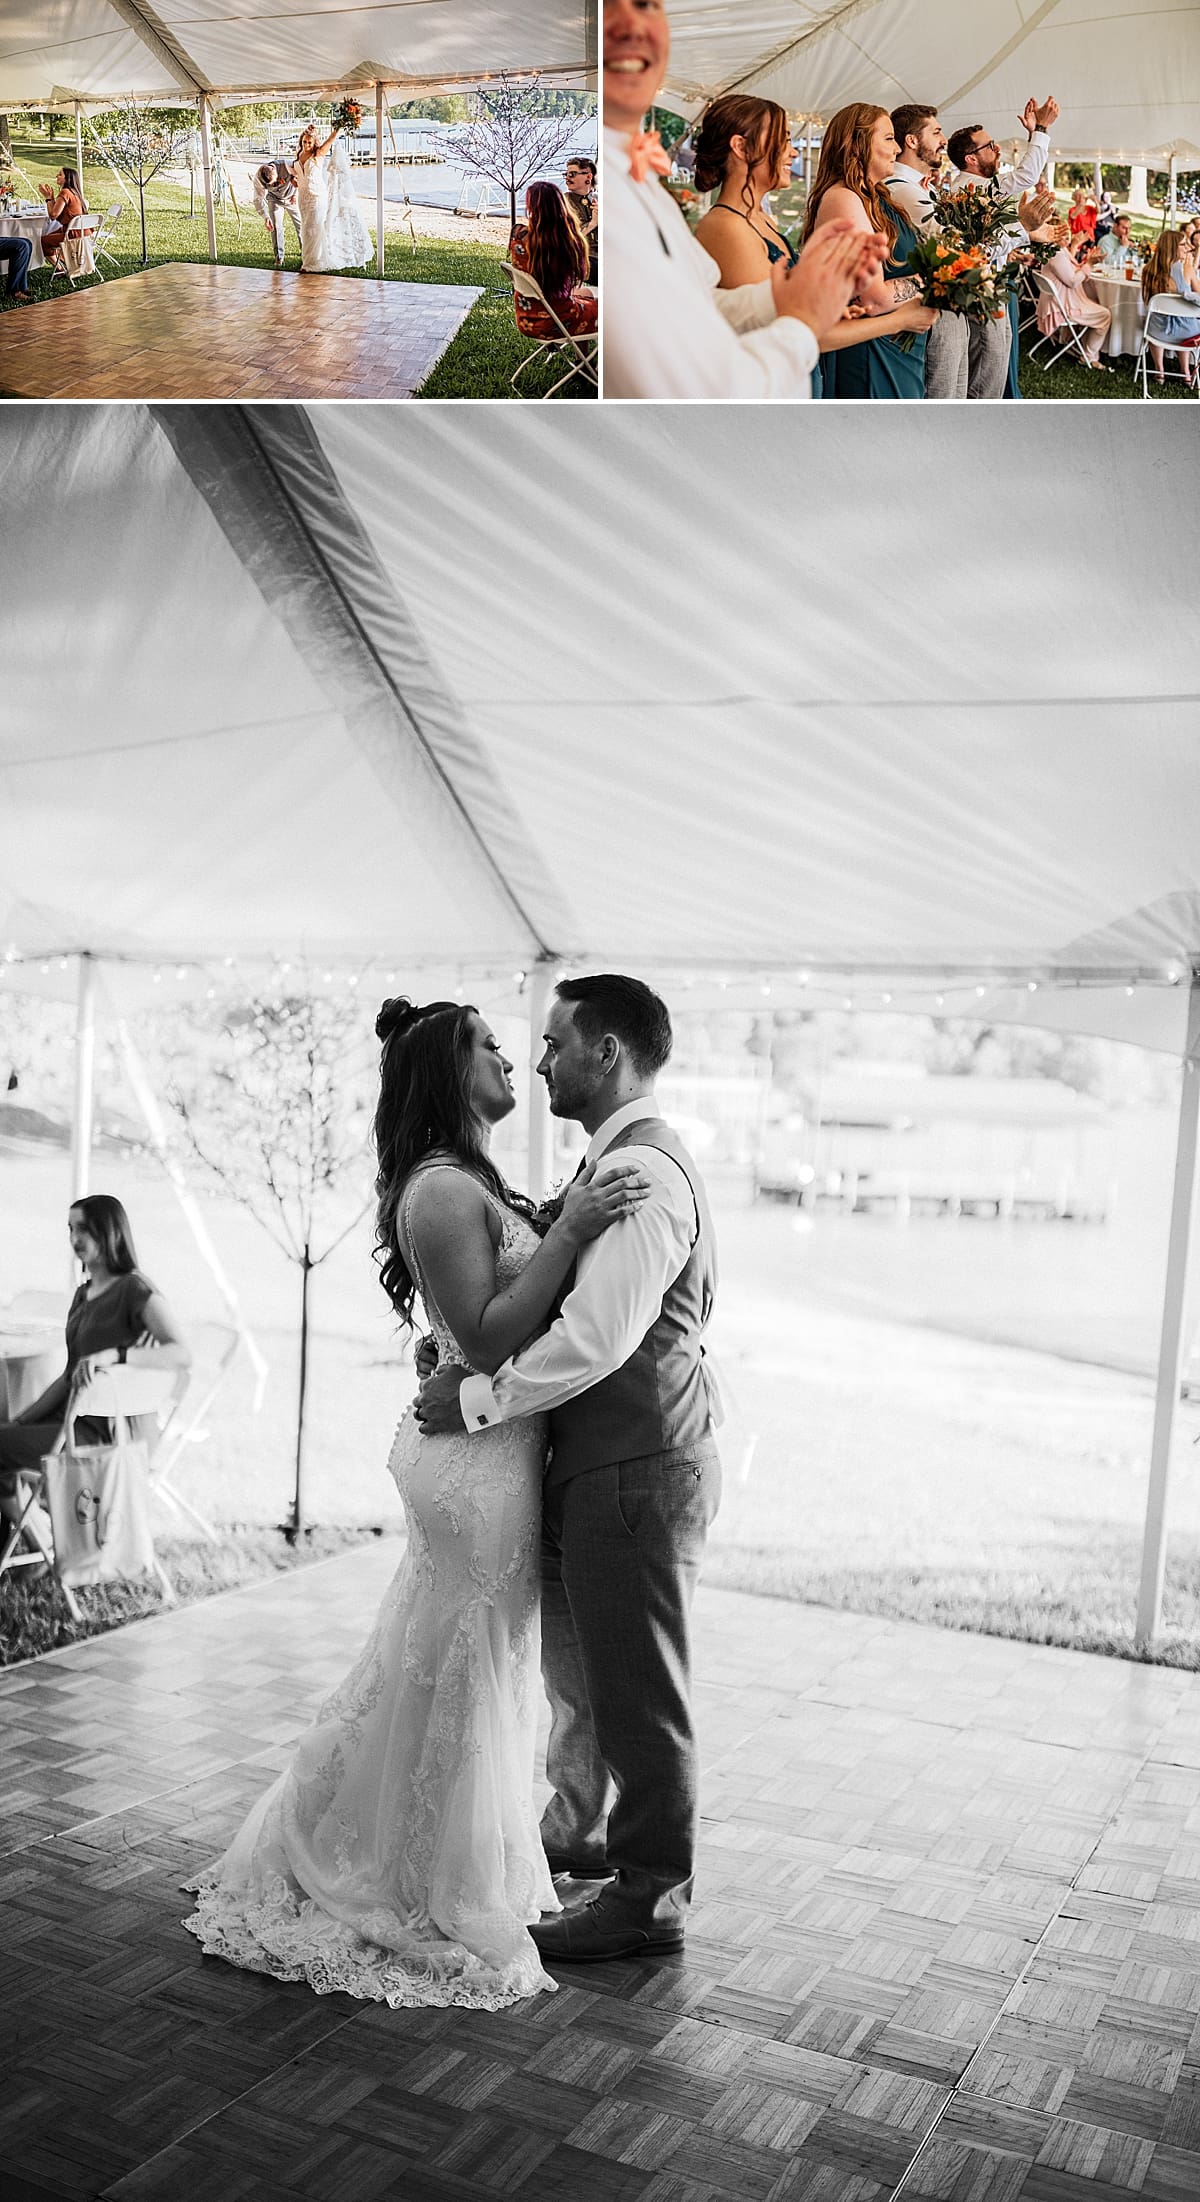 bride and groom dancing at tented outdoor reception